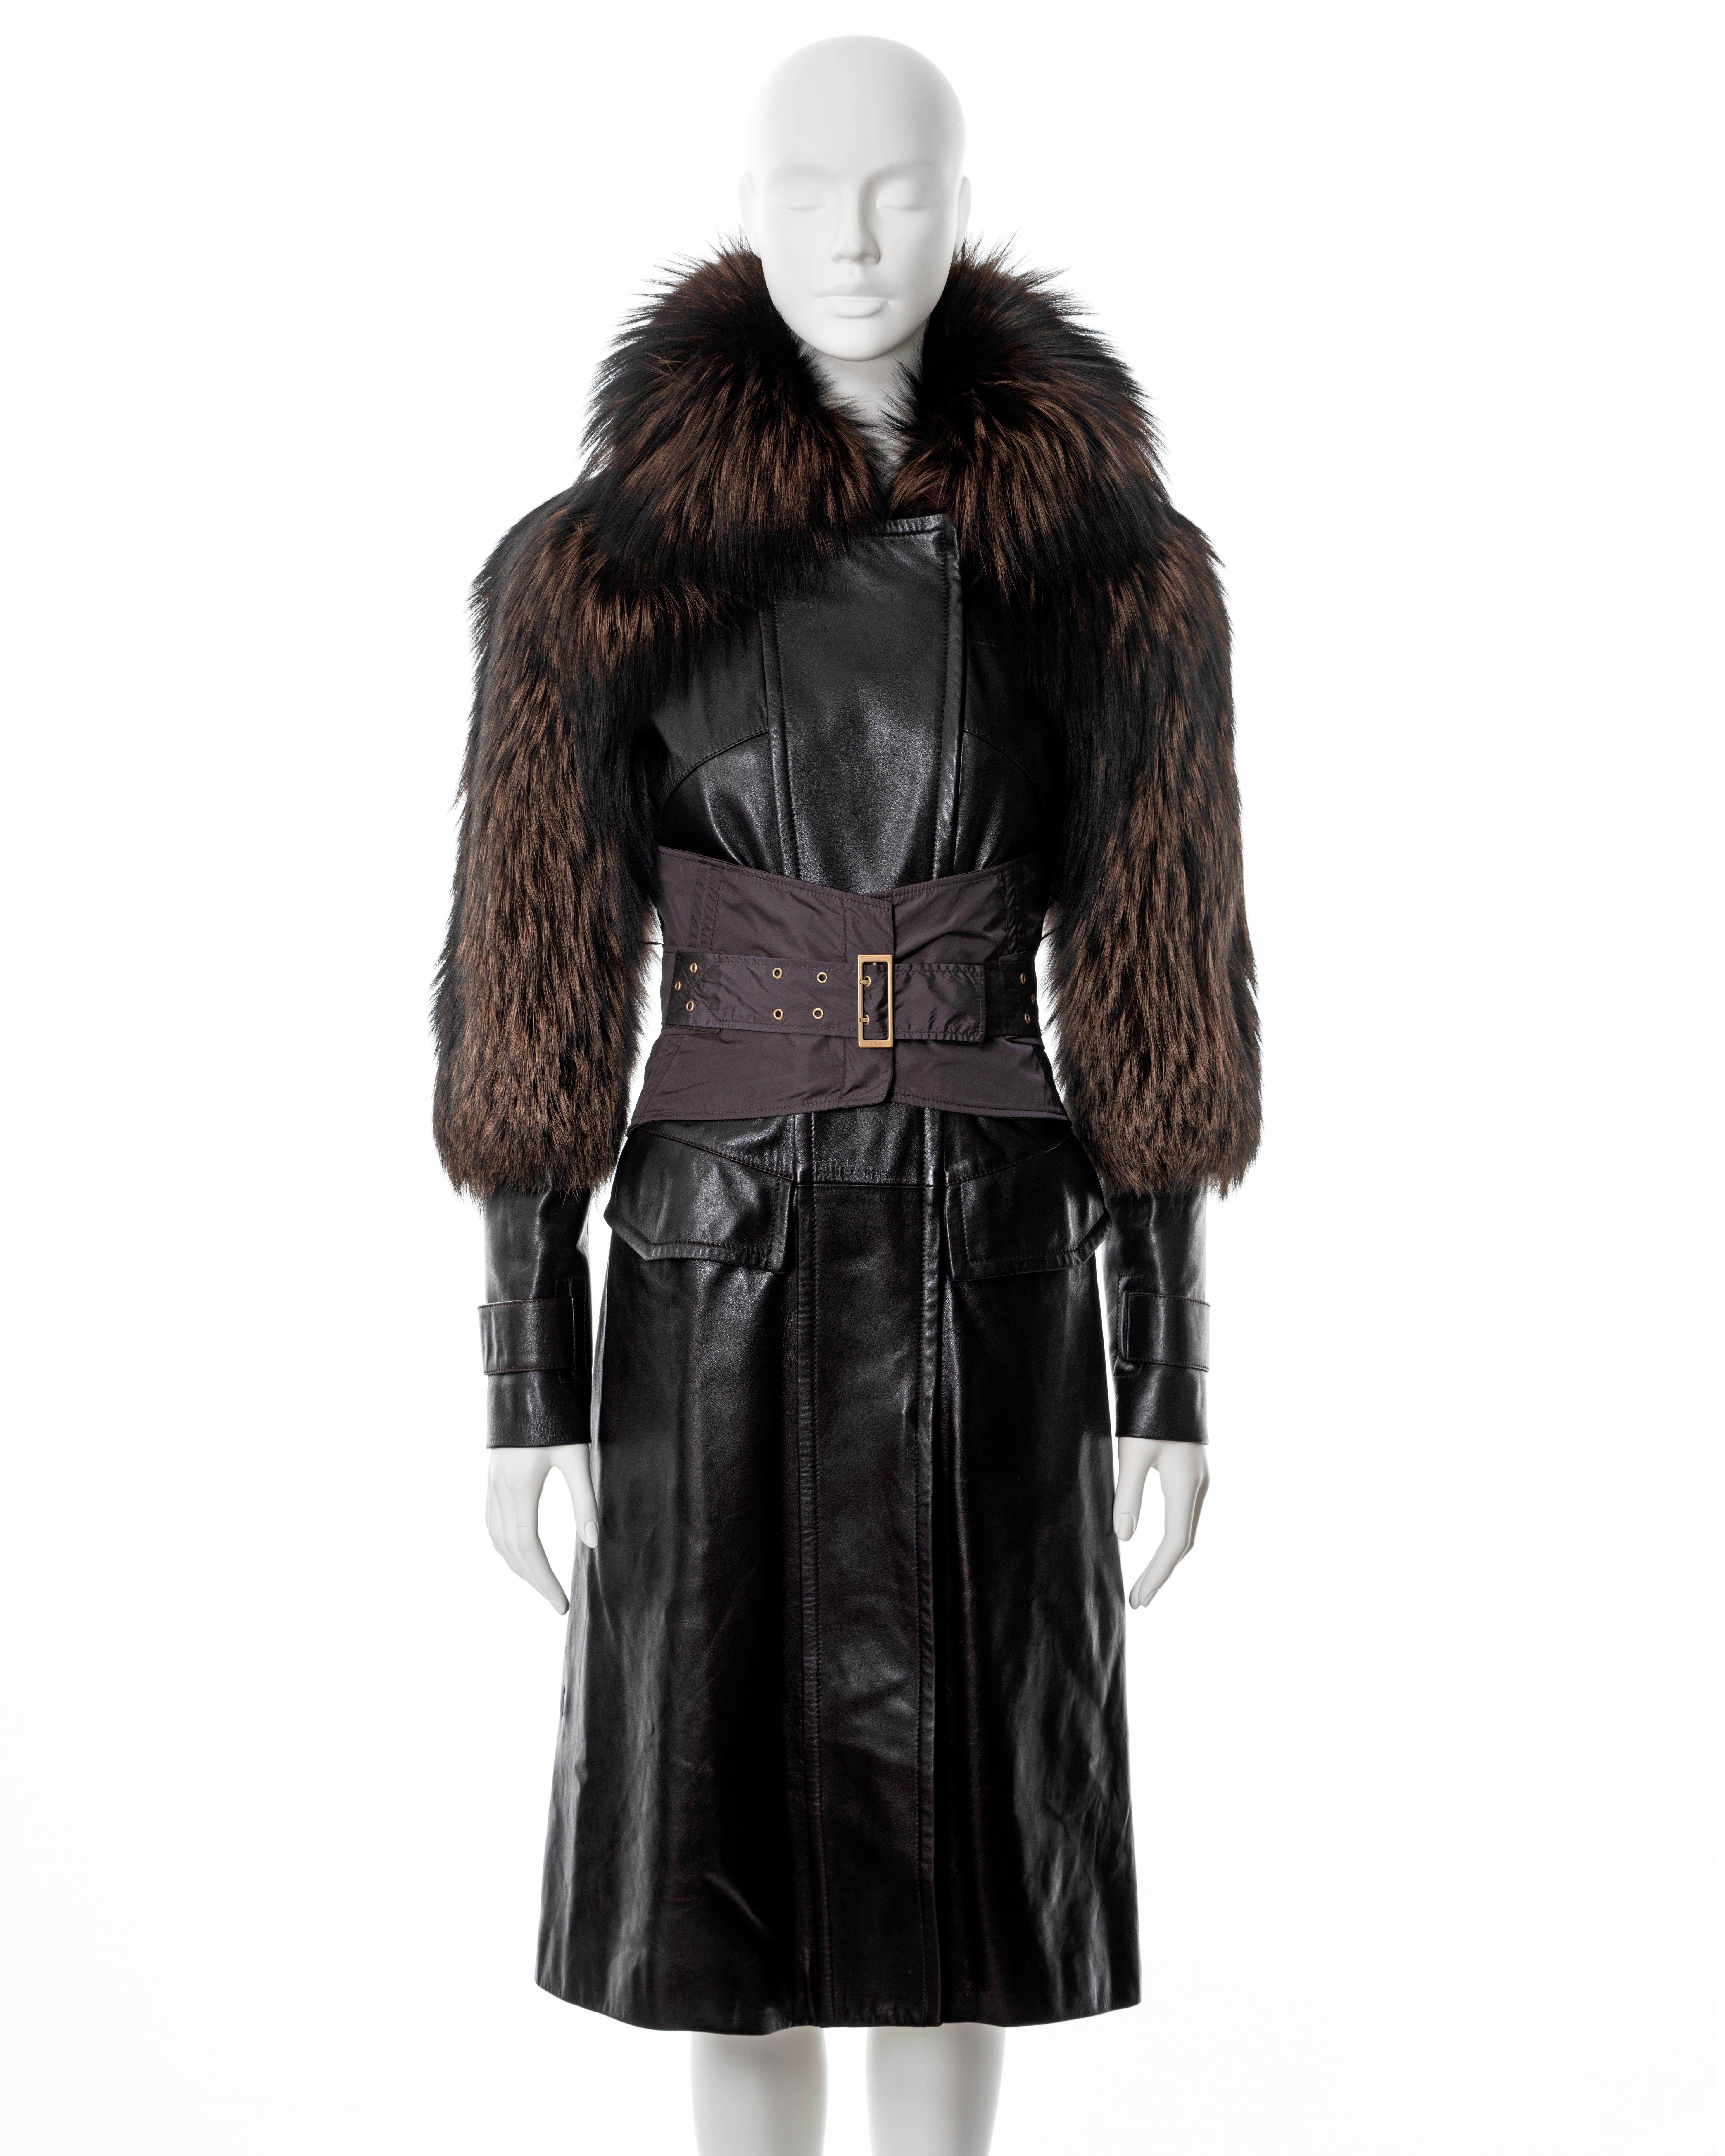 ▪ Gucci brown leather coat 
▪ Designed by Tom Ford
▪ Sold by One of a Kind Archive
▪ Fall-Winter 2003
▪ Constructed from dark brown leather and fox fur 
▪ Integrated corset with gold-tone hardware 
▪ 2 front flap pockets
▪ Double-ended front zipper